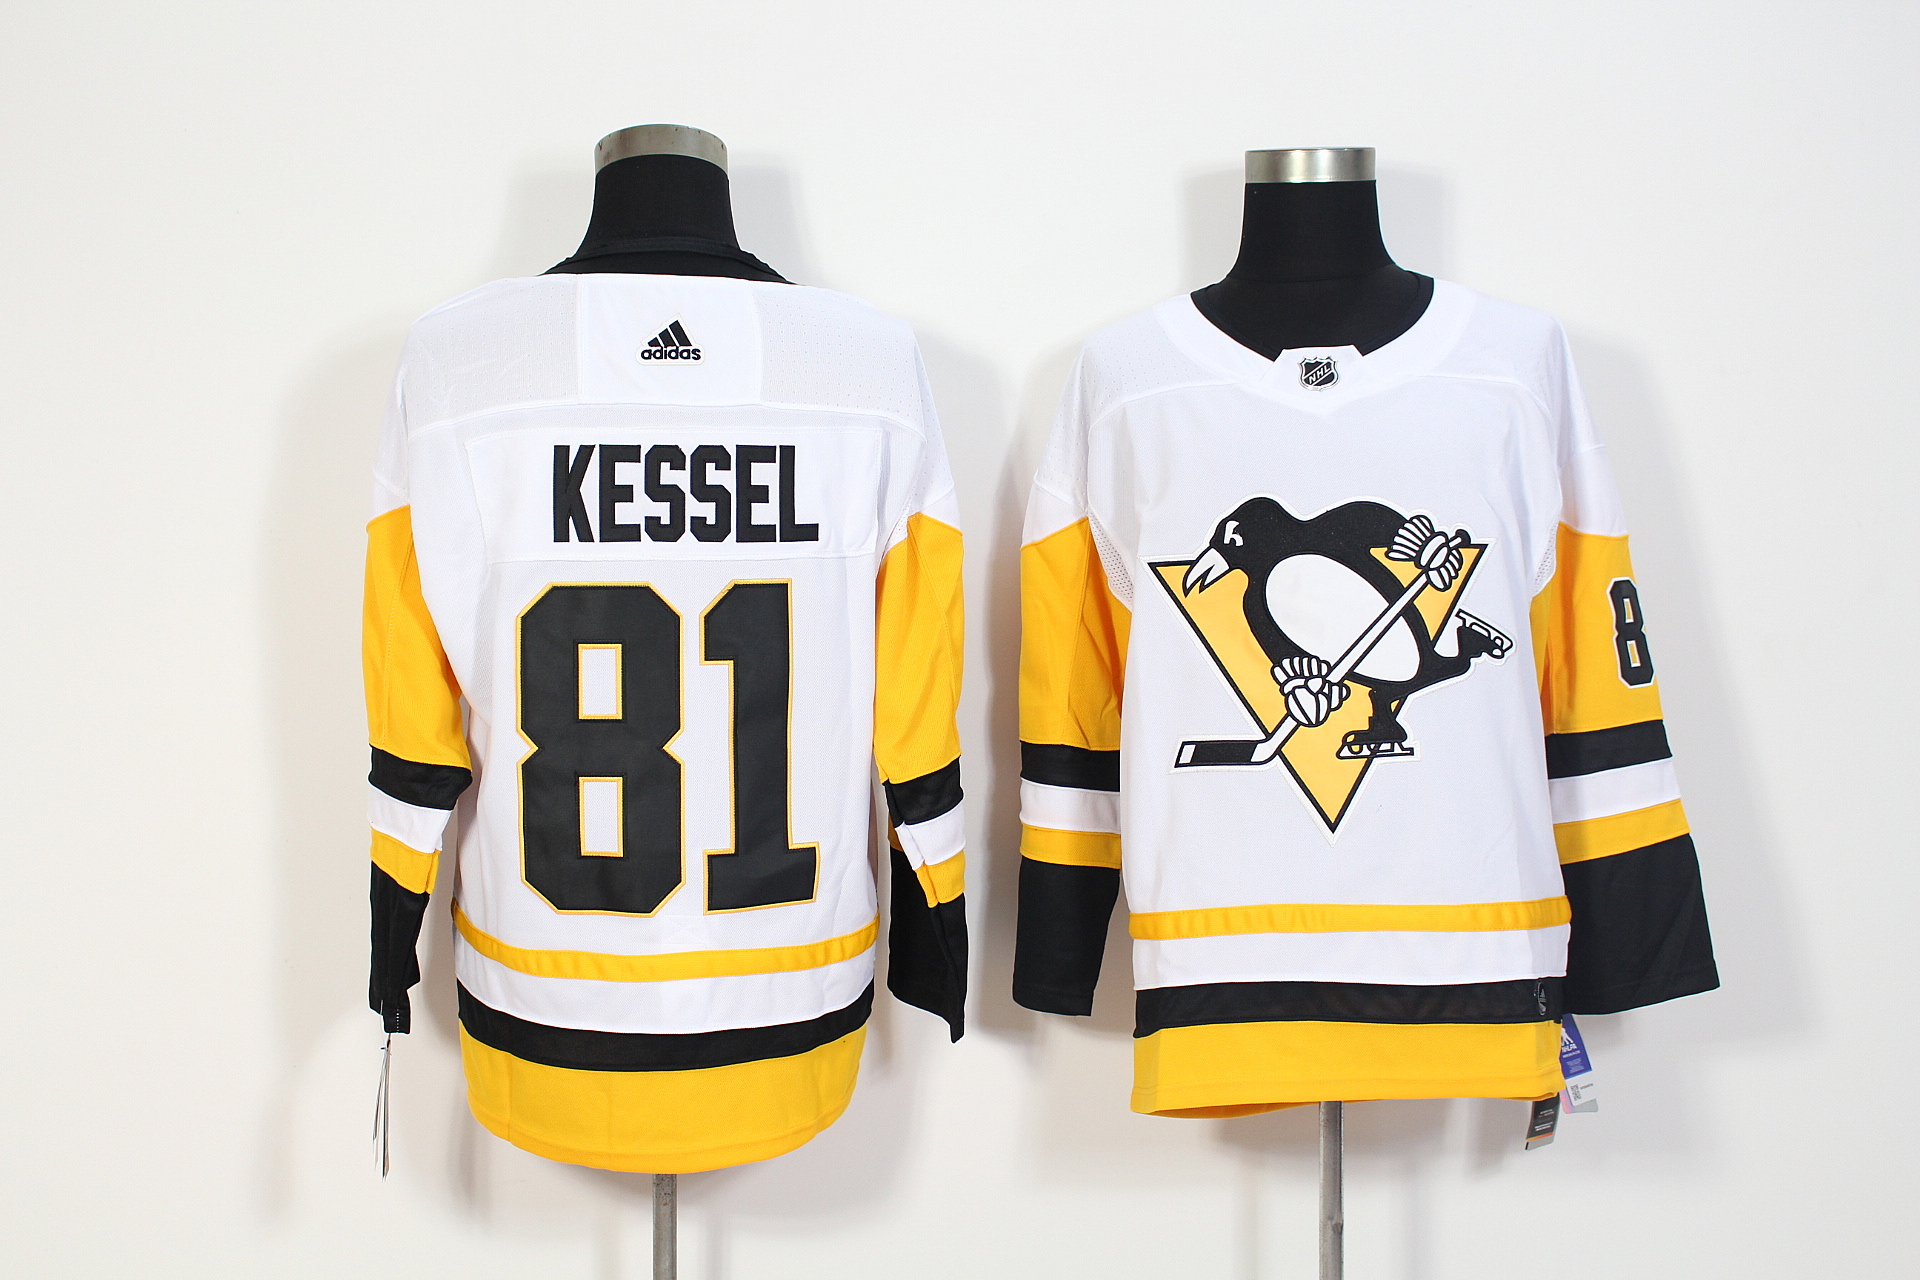 Men's Adidas Pittsburgh Penguins #81 Phil Kessel White Stitched NHL Jersey